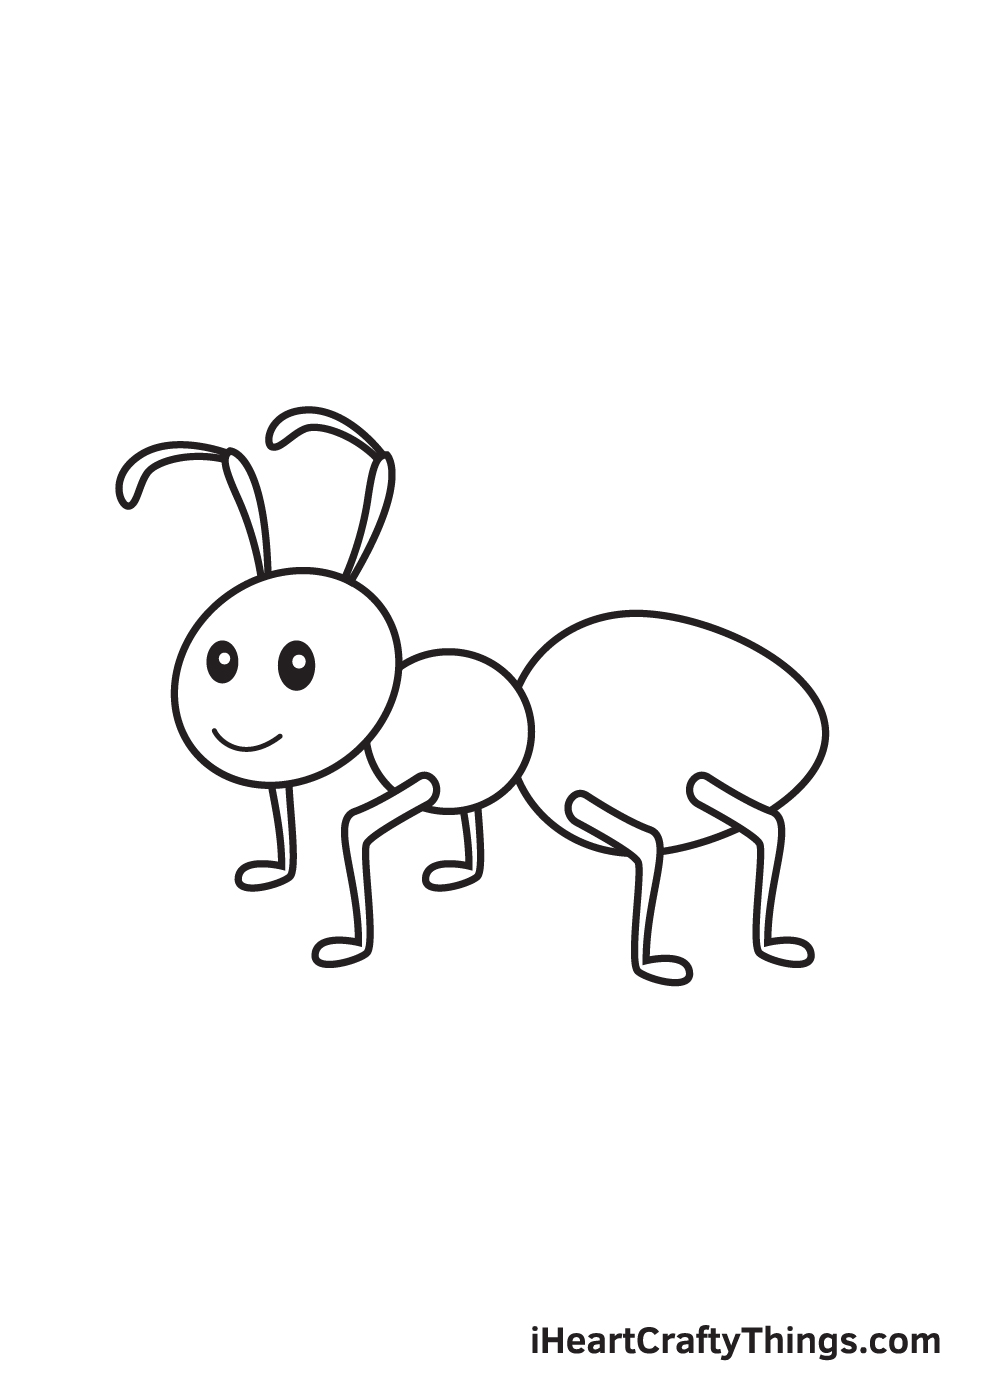 ant drawing step 9